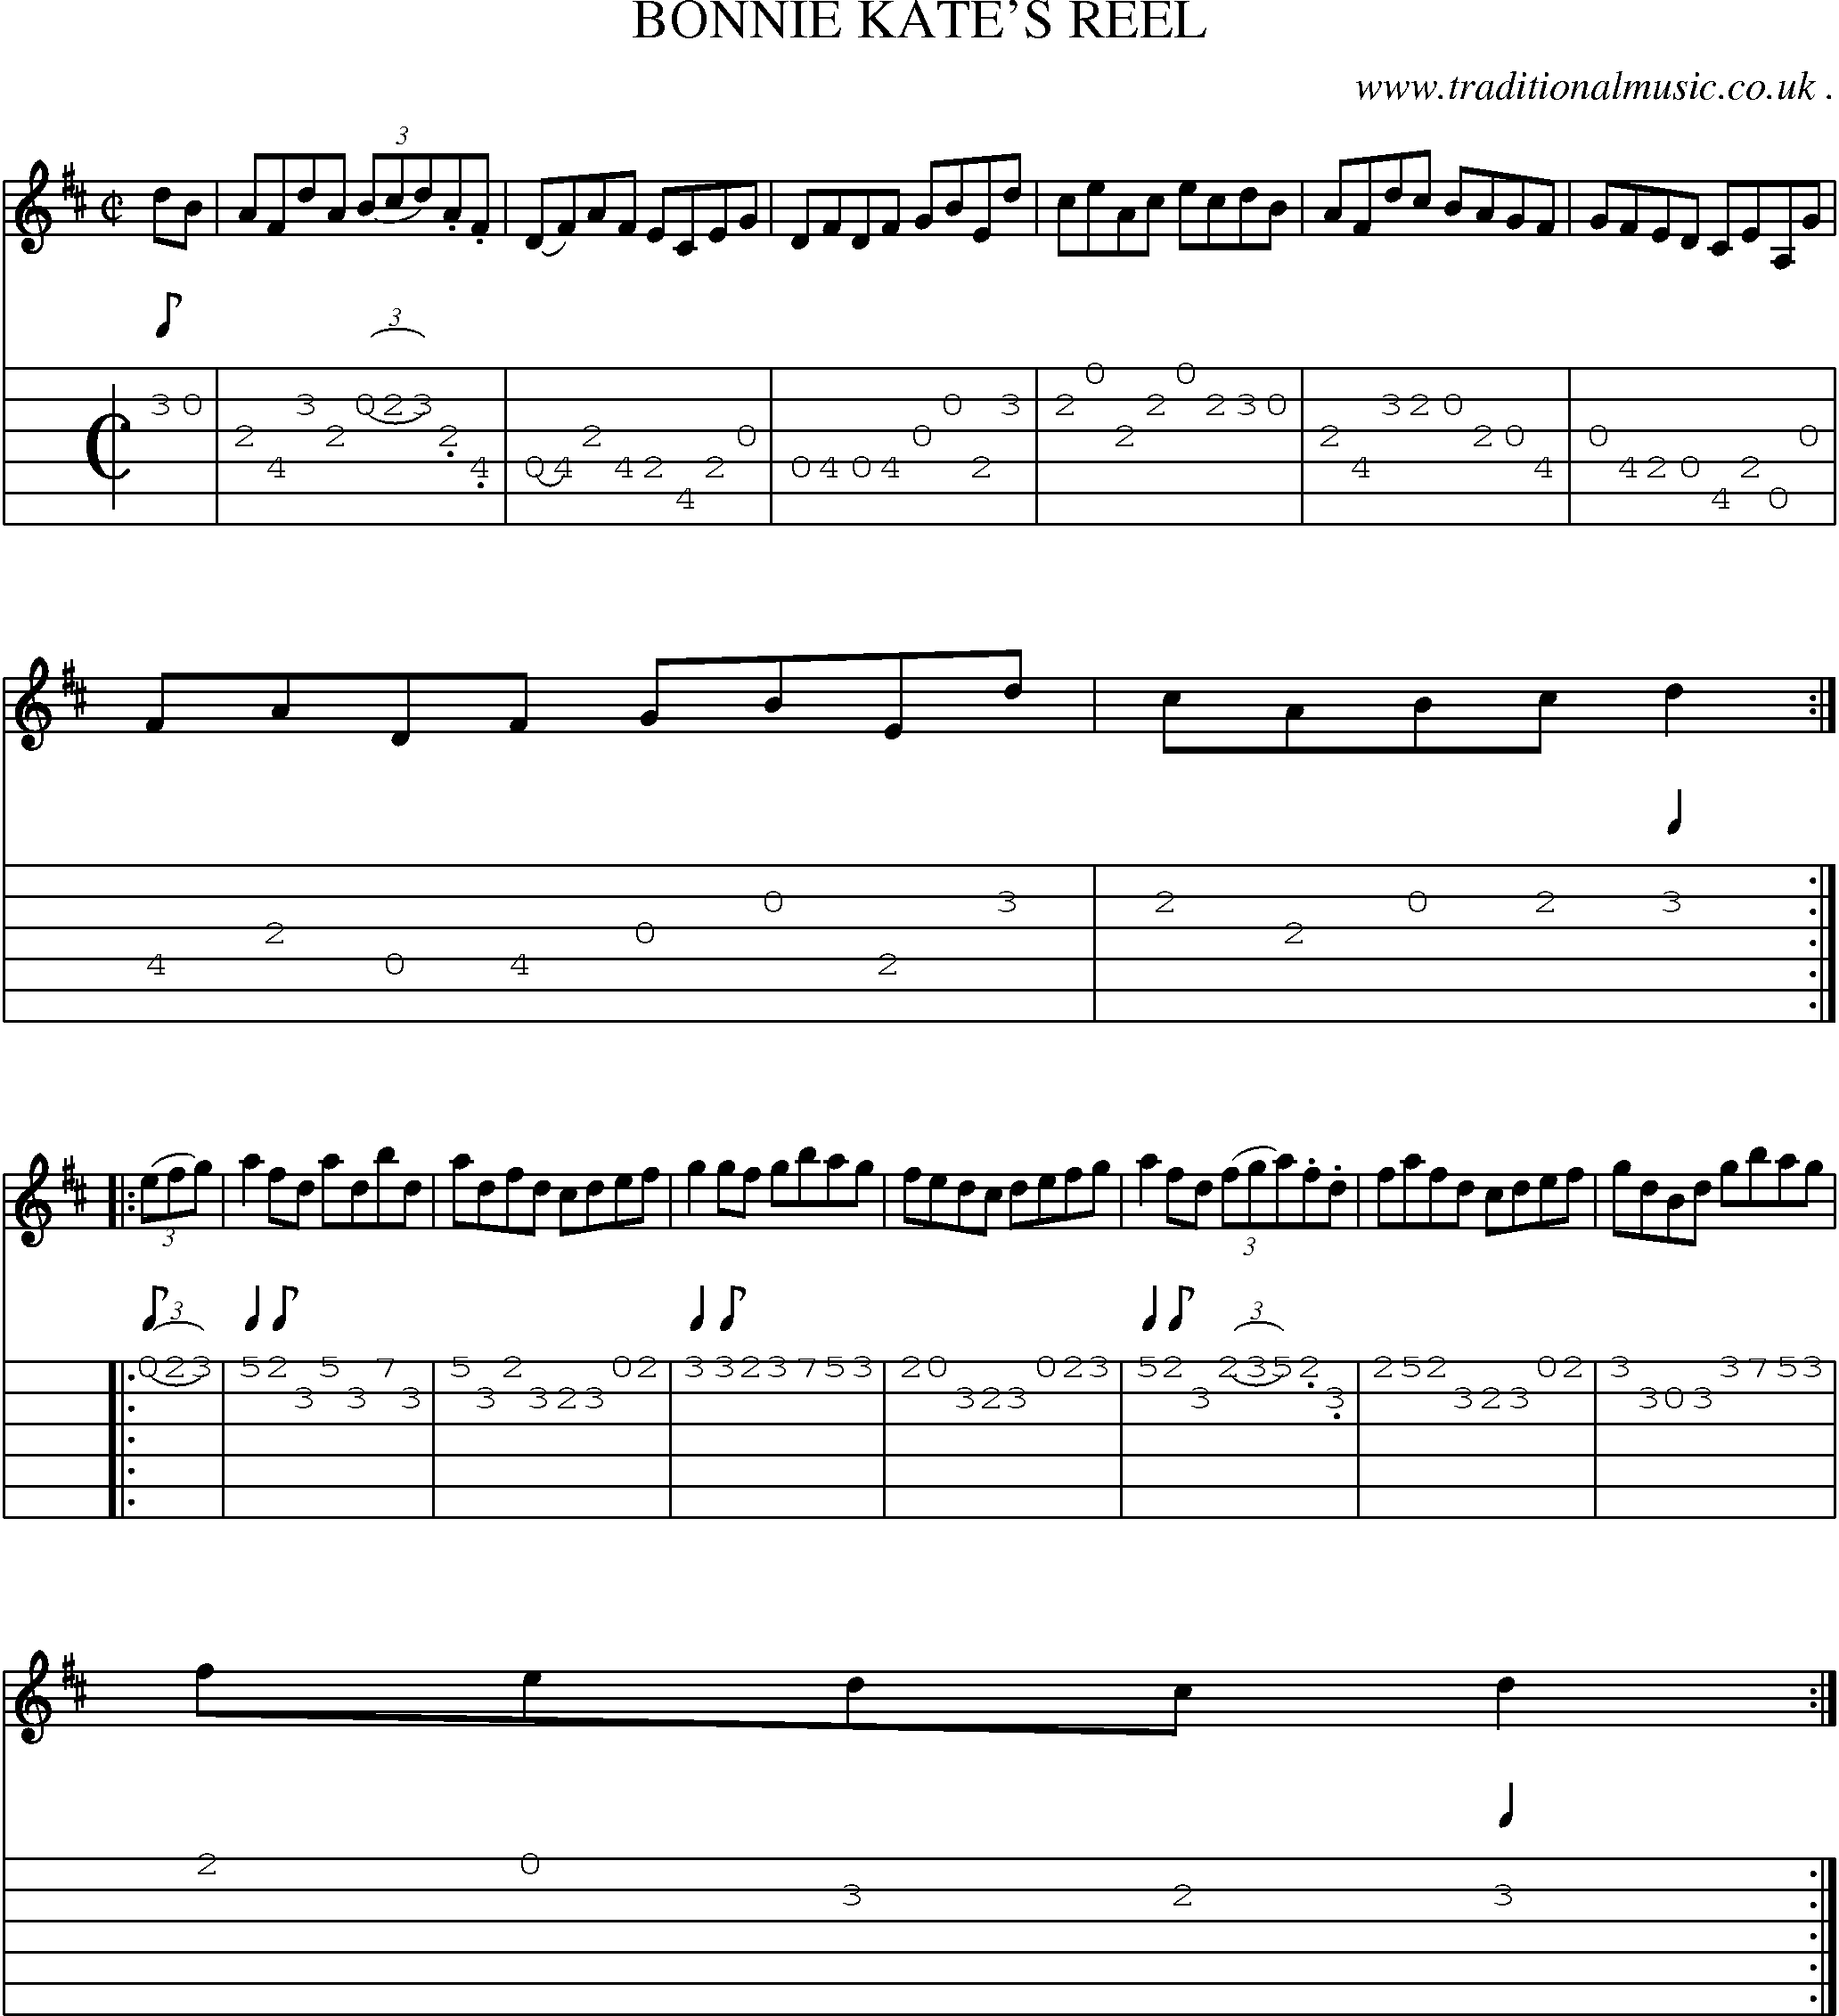 Sheet-Music and Guitar Tabs for Bonnie Kates Reel